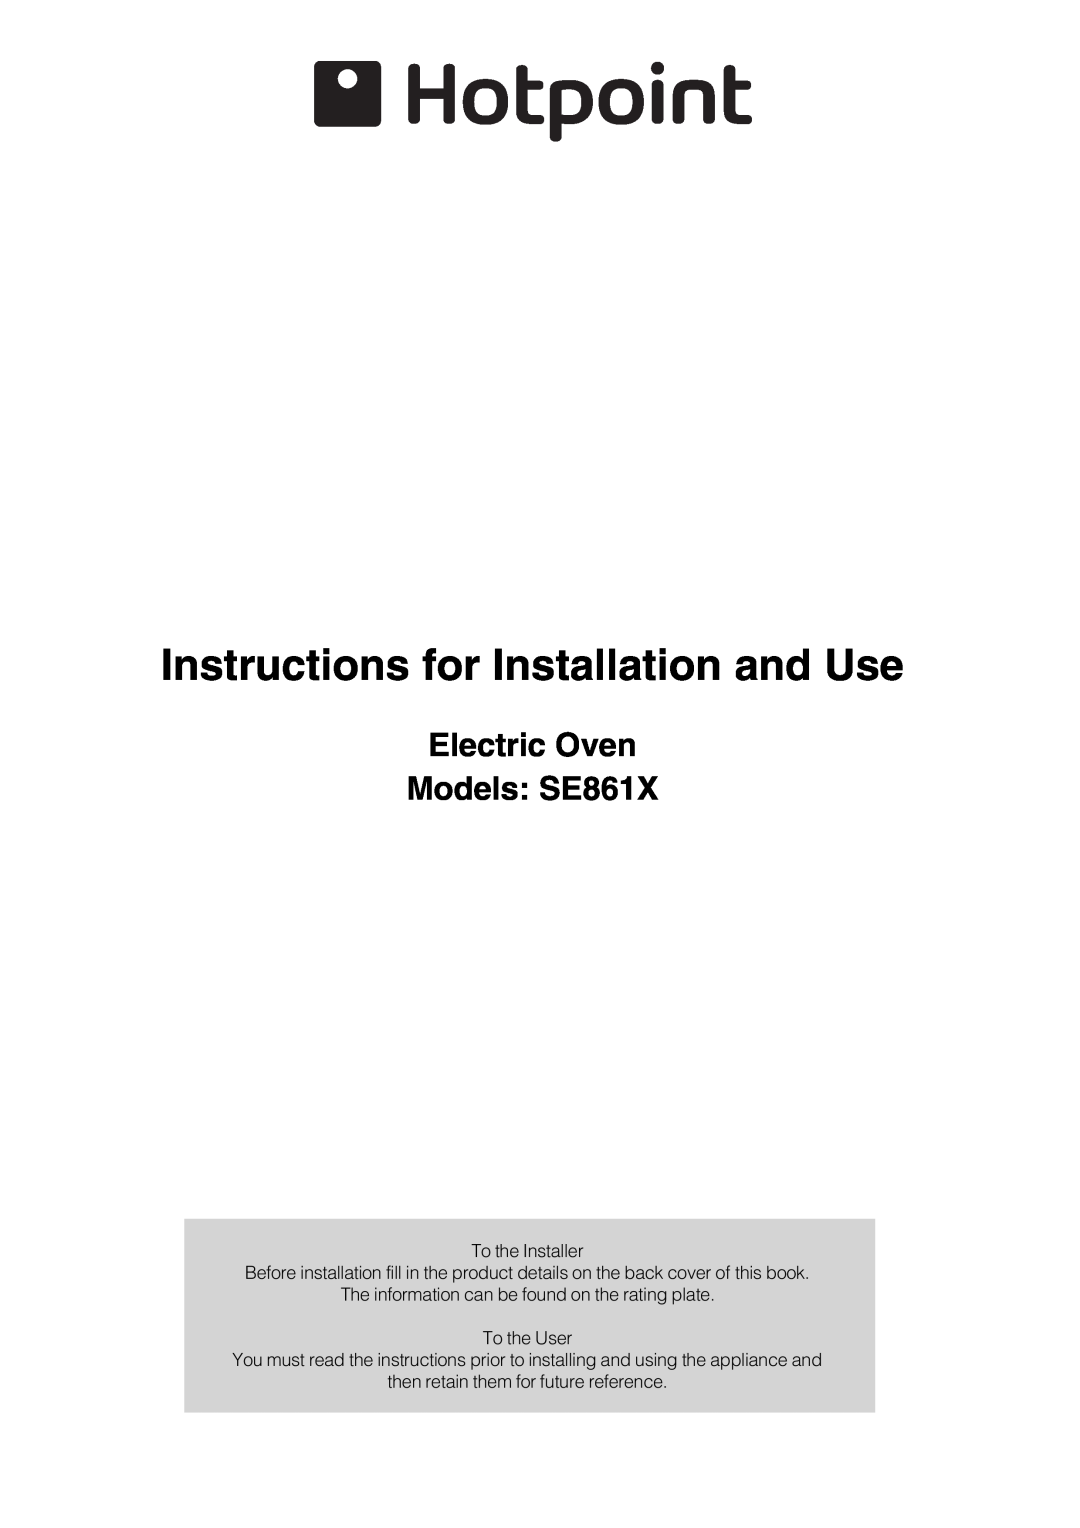 Hotpoint manual Instructions for Installation and Use, Electric Oven Models SE861X 